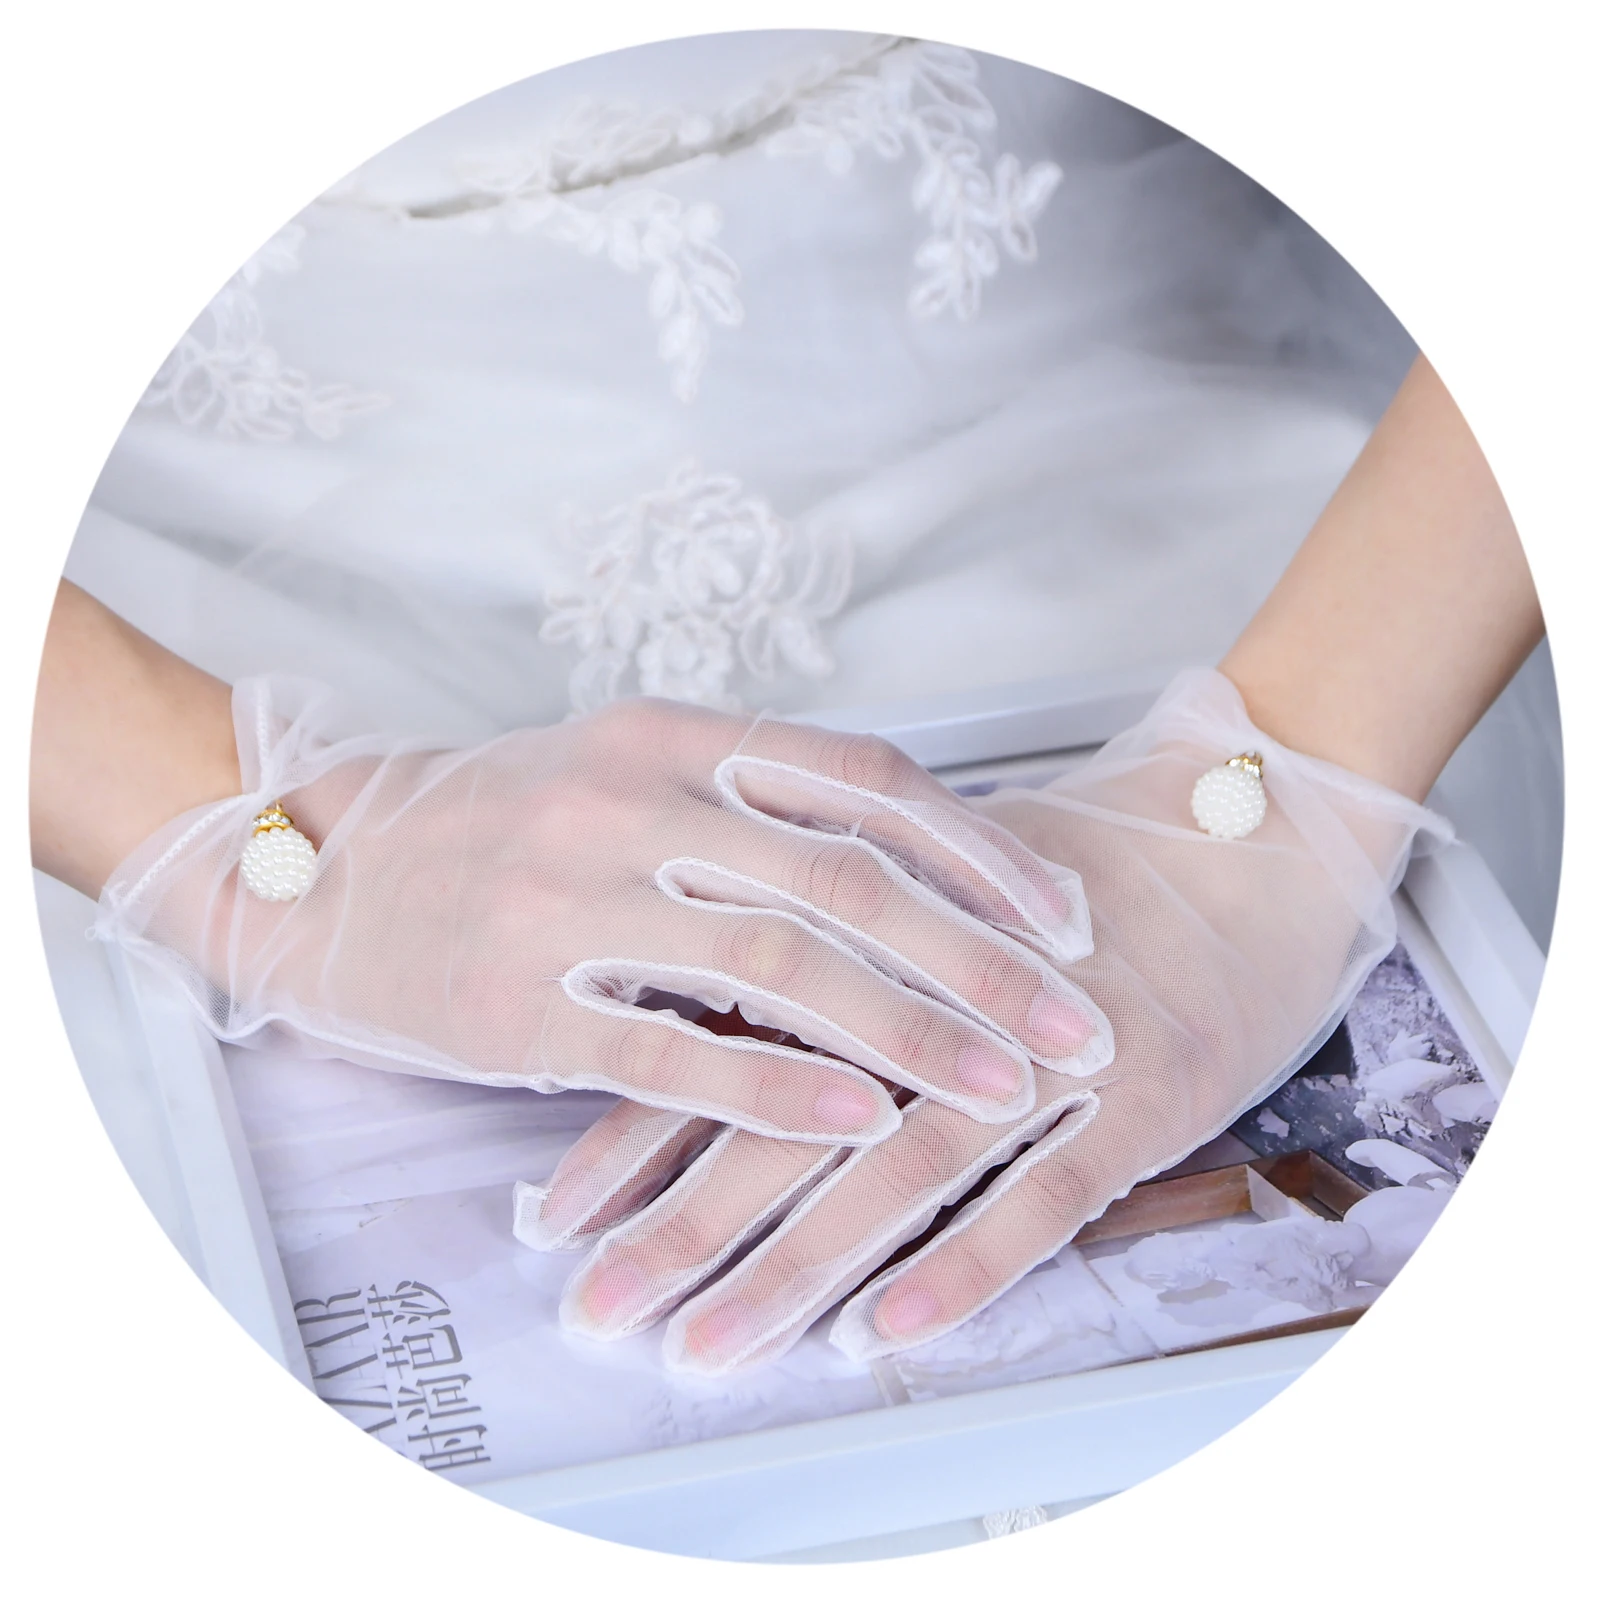 

M03 Home Ladies Mittens Fingered Gloves Women Gloves with Pearls Beaded Wedding Gloves Thin White Translucent Gauze Glove